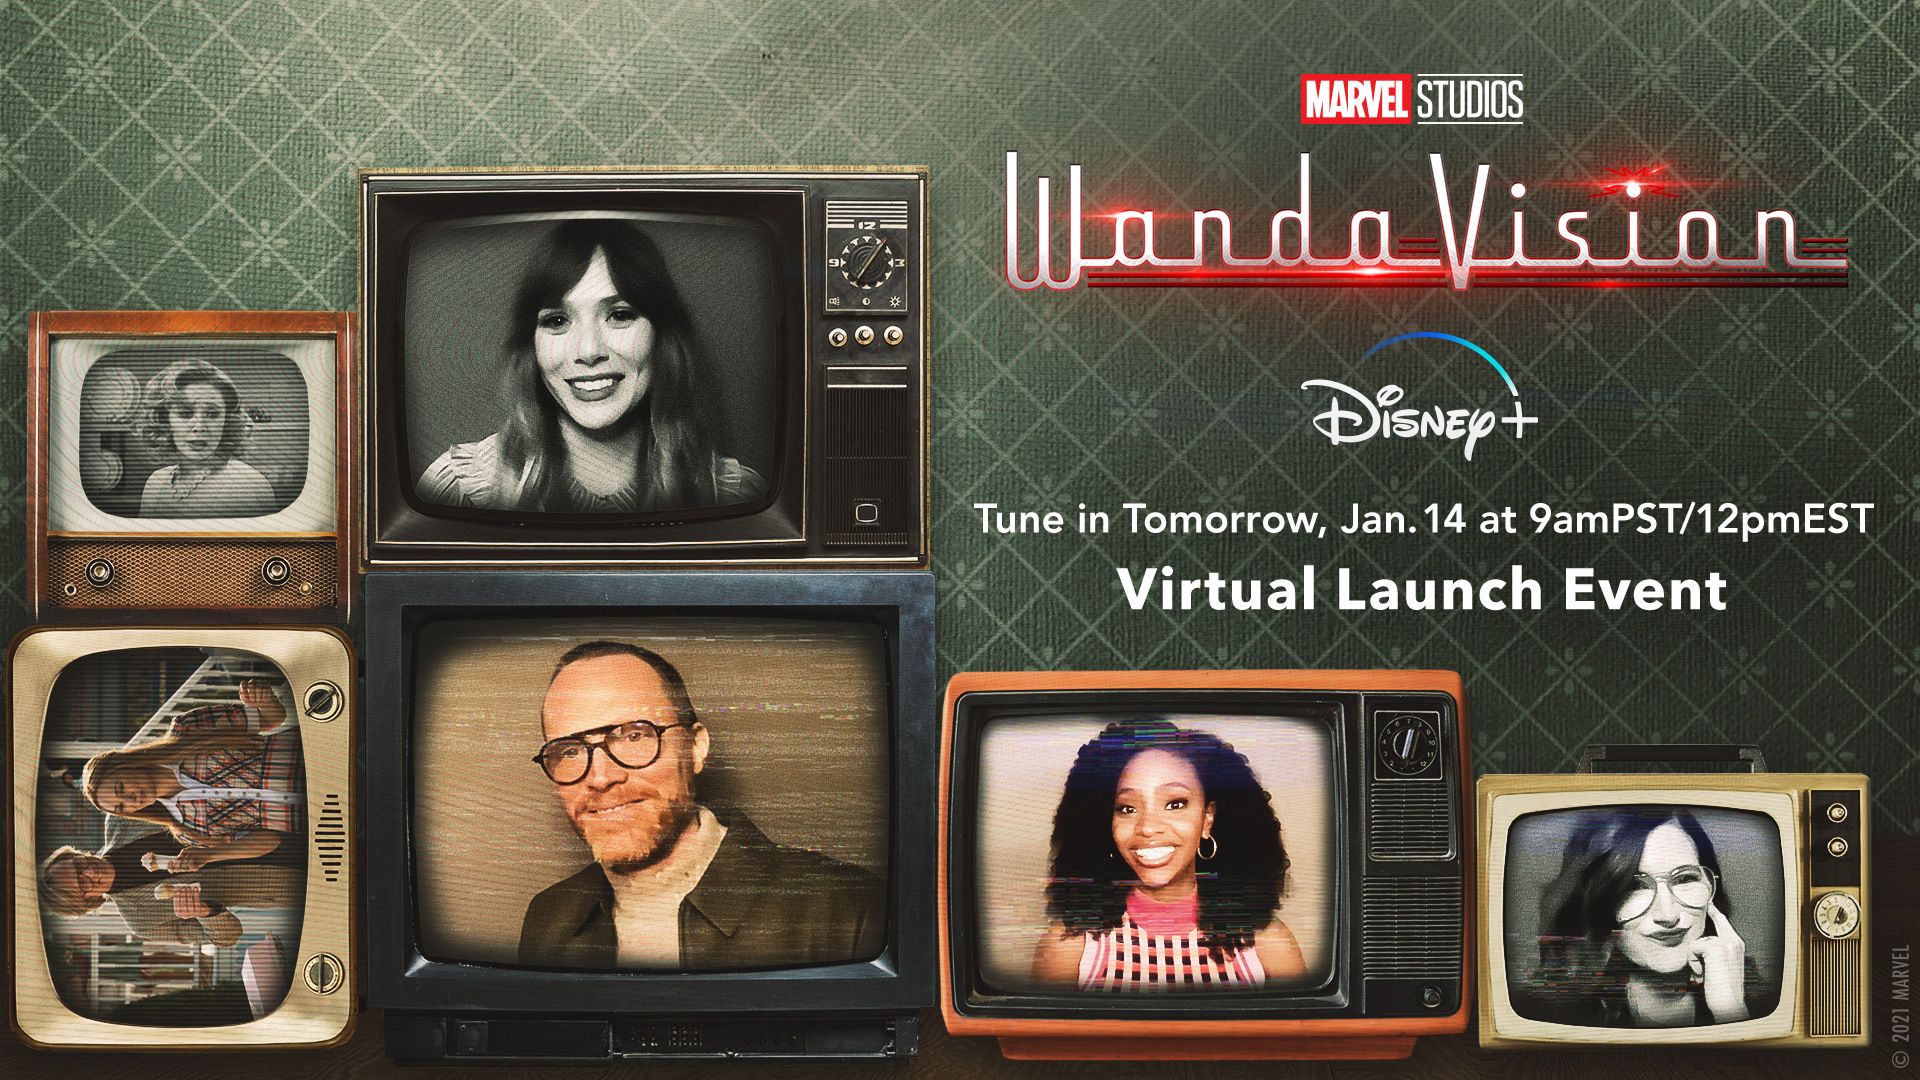 Set Those Alarms! Disney+ Is Hosting a WandaVision Virtual Launch Event at 9 am PST Tomorrow!